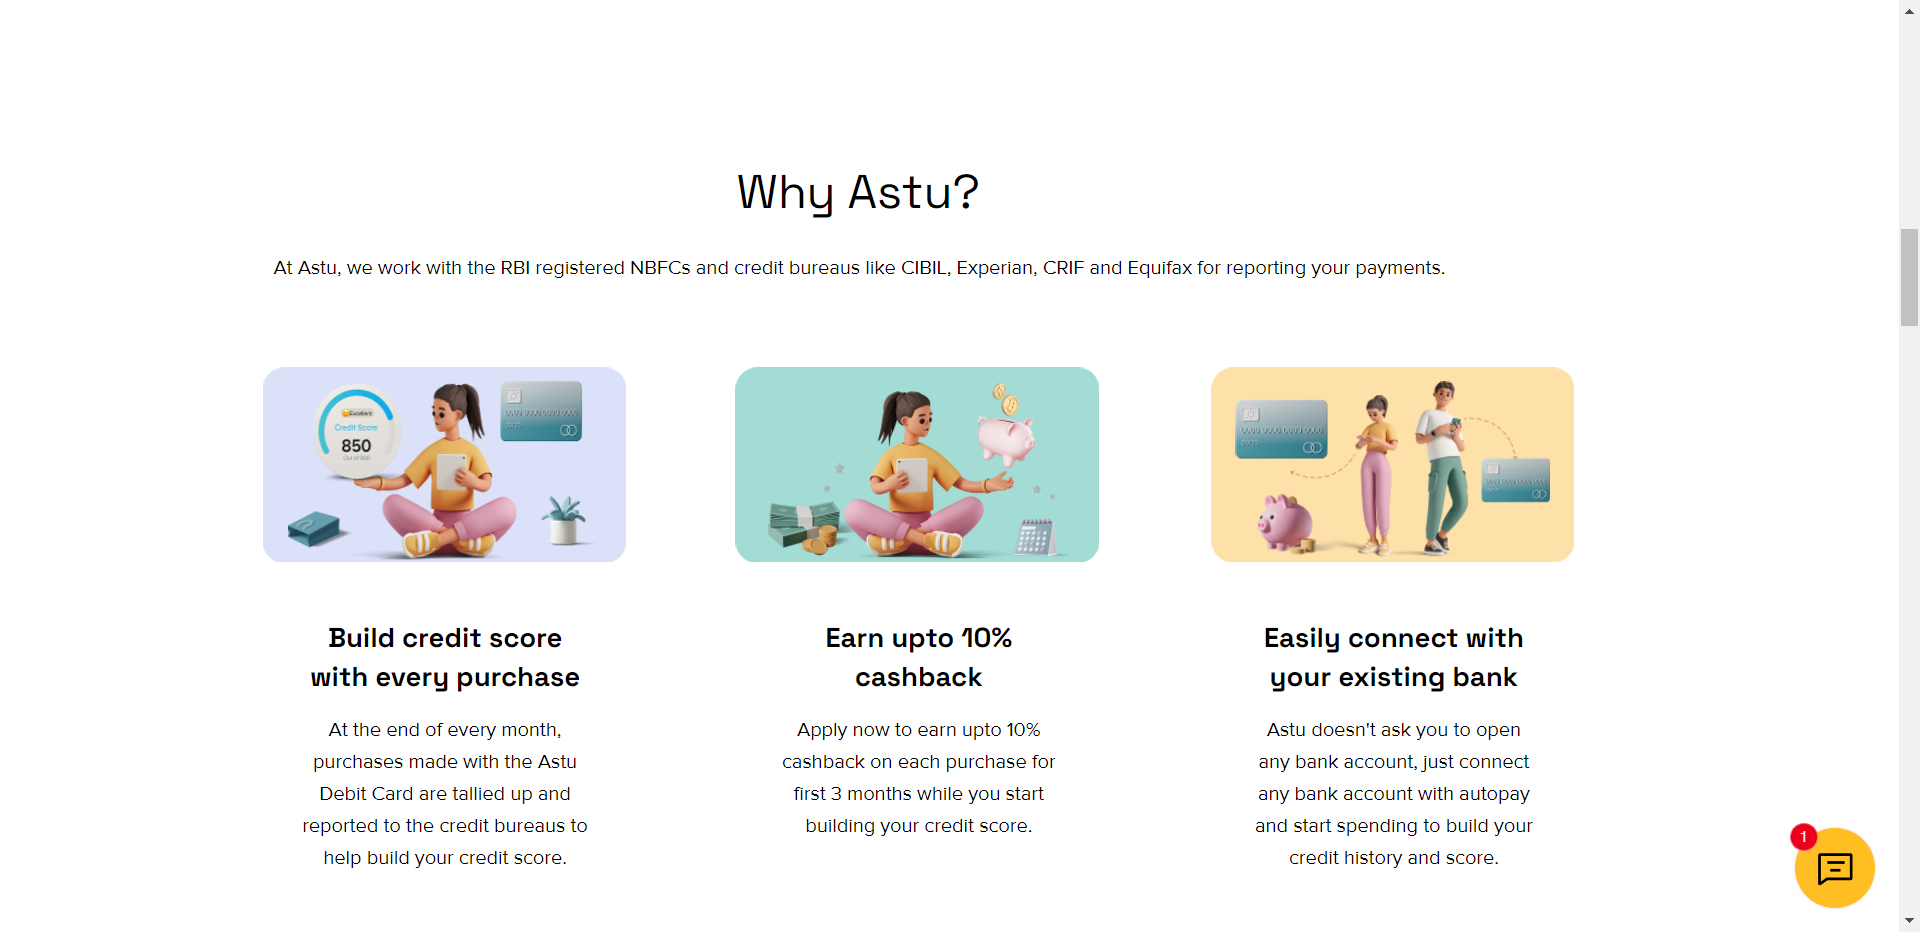 Astu features and offers